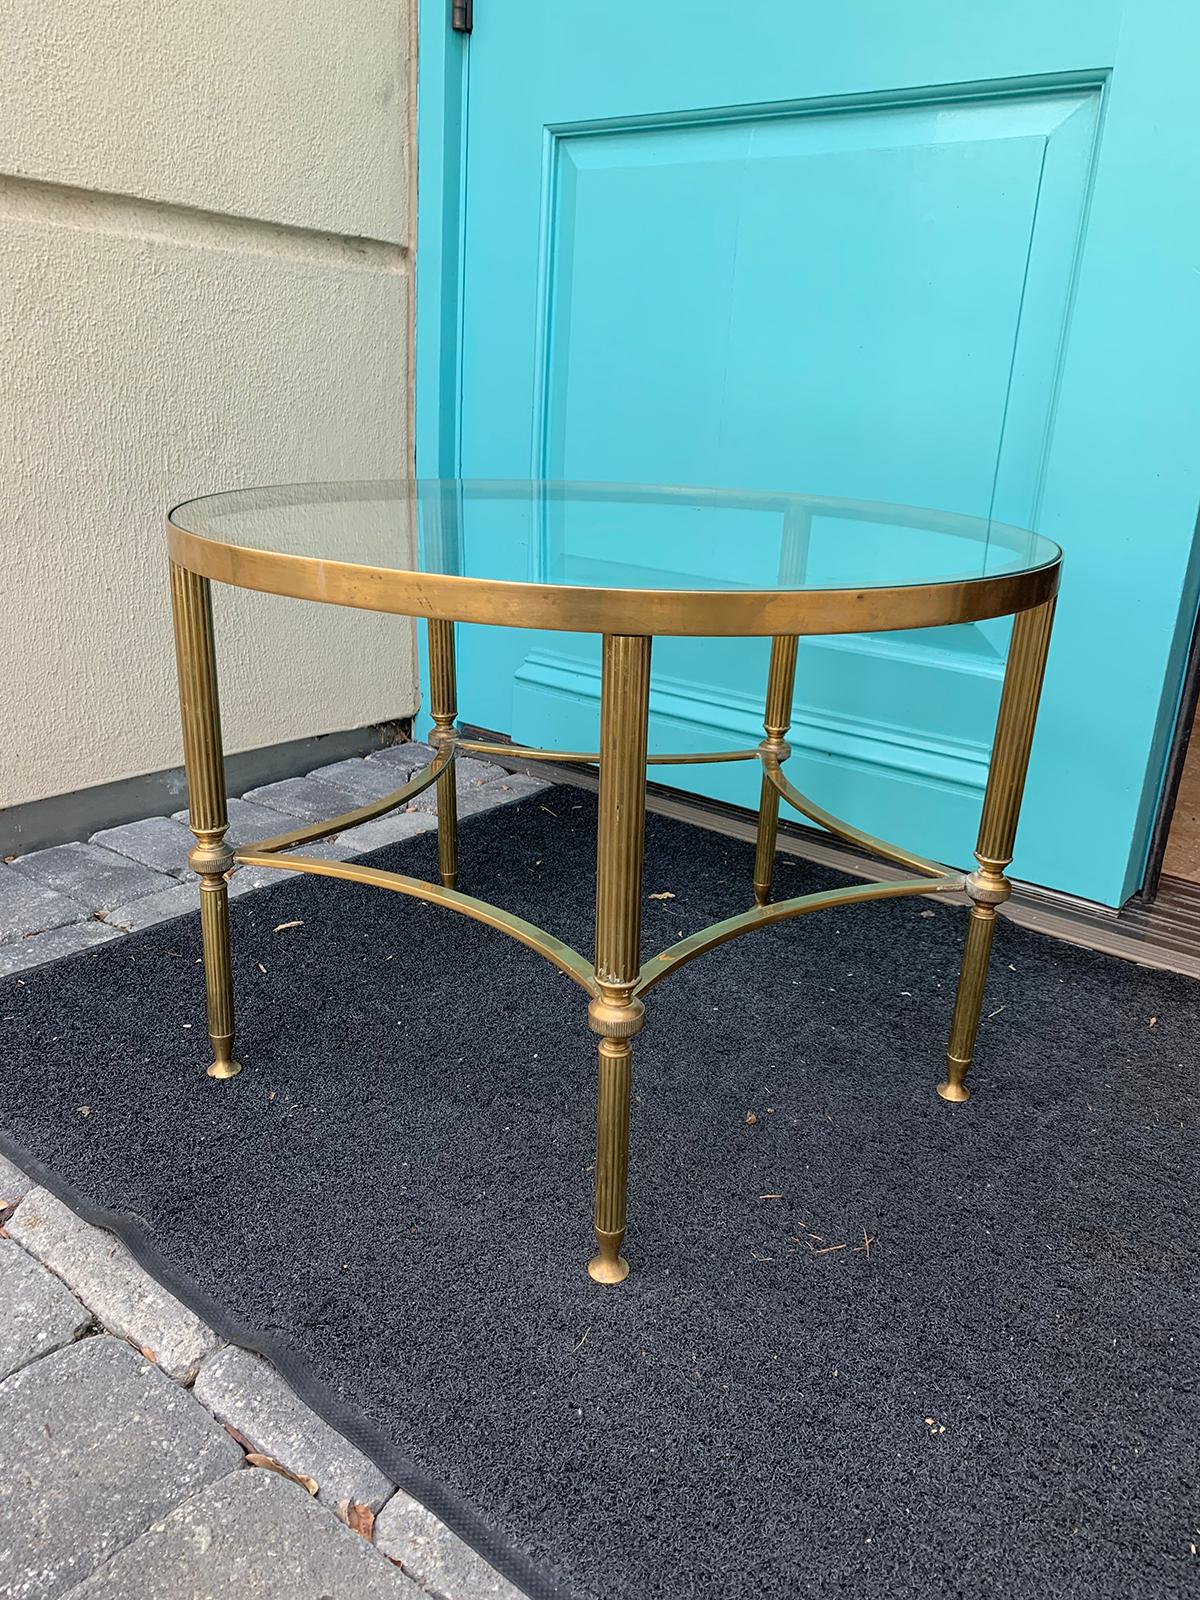 Mid-20th century round brass coffee table, glass top, in the style of Baguès.